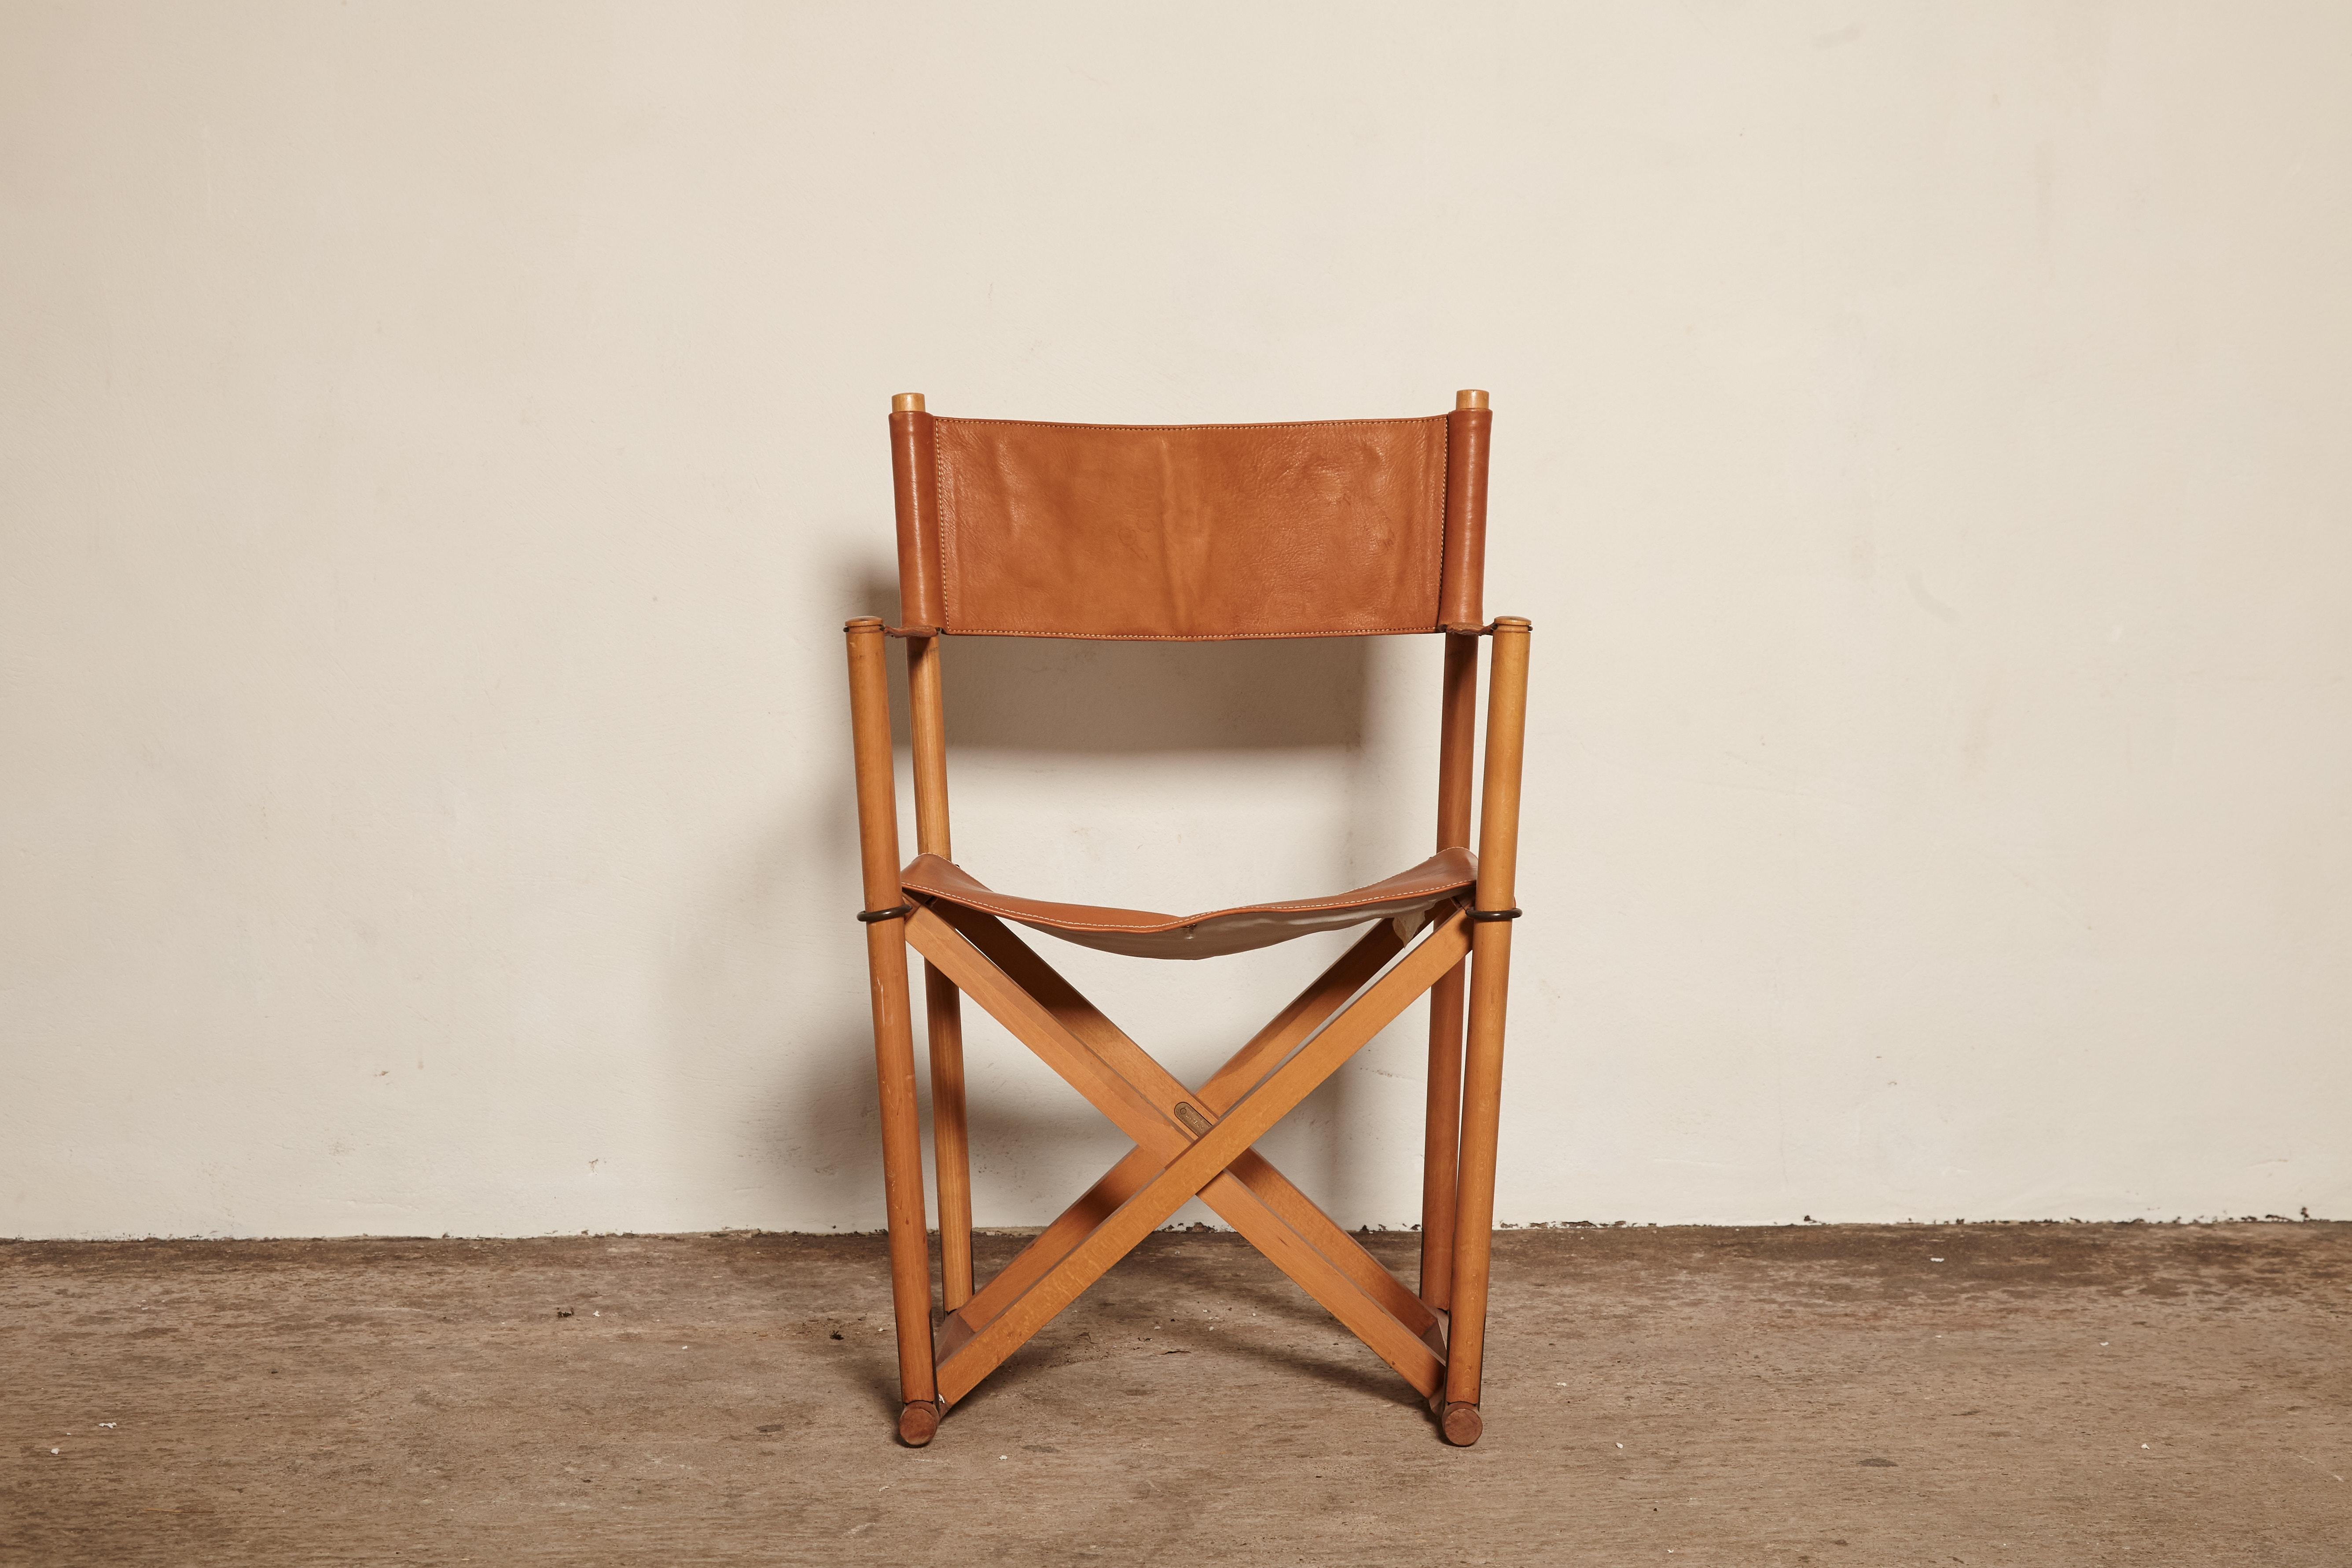 Mogens Koch MK-16 Safari chair for Interna, Denmark, 1960s. Originally designed in 1932 this chair wasn't produced commercially until the 1960s. The chair has a beech frame with a rare cognac leather seat, backrest and armrests. With makers label